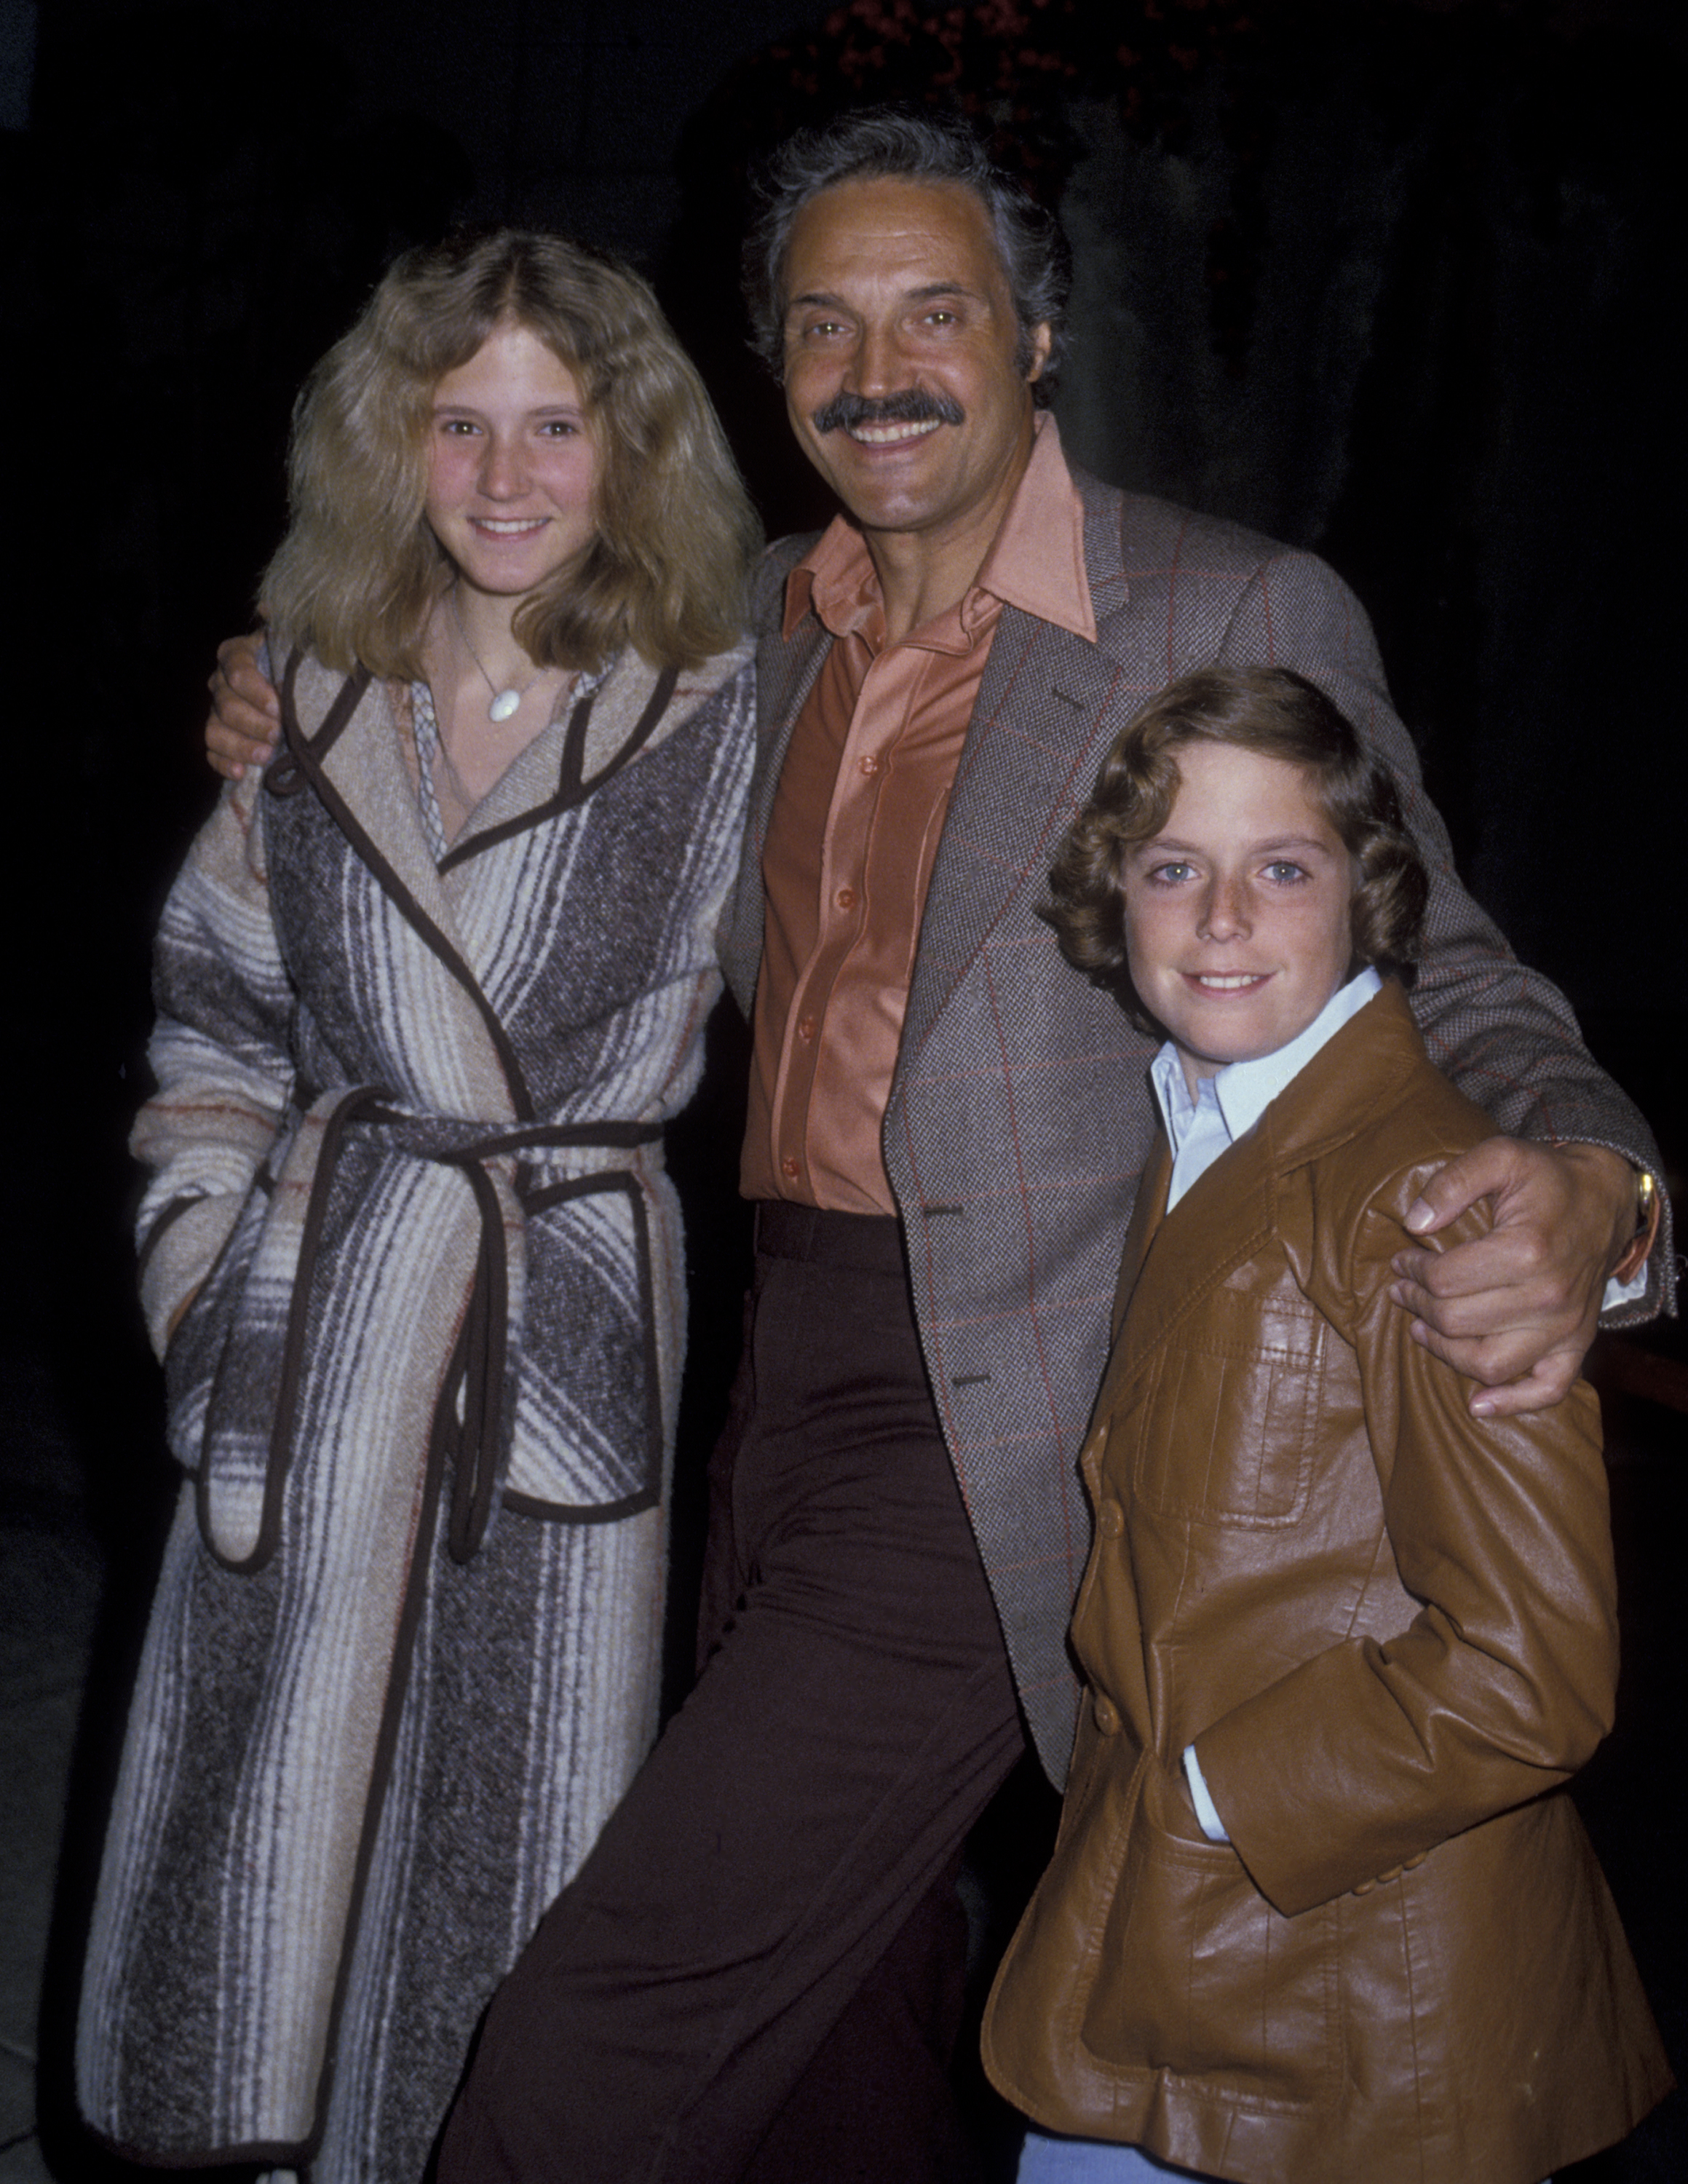 Frances Martin, Hal Linden, and their son, Ian Linden at the "Raoni" premiere on March 28, 1979. | Source: Getty Images